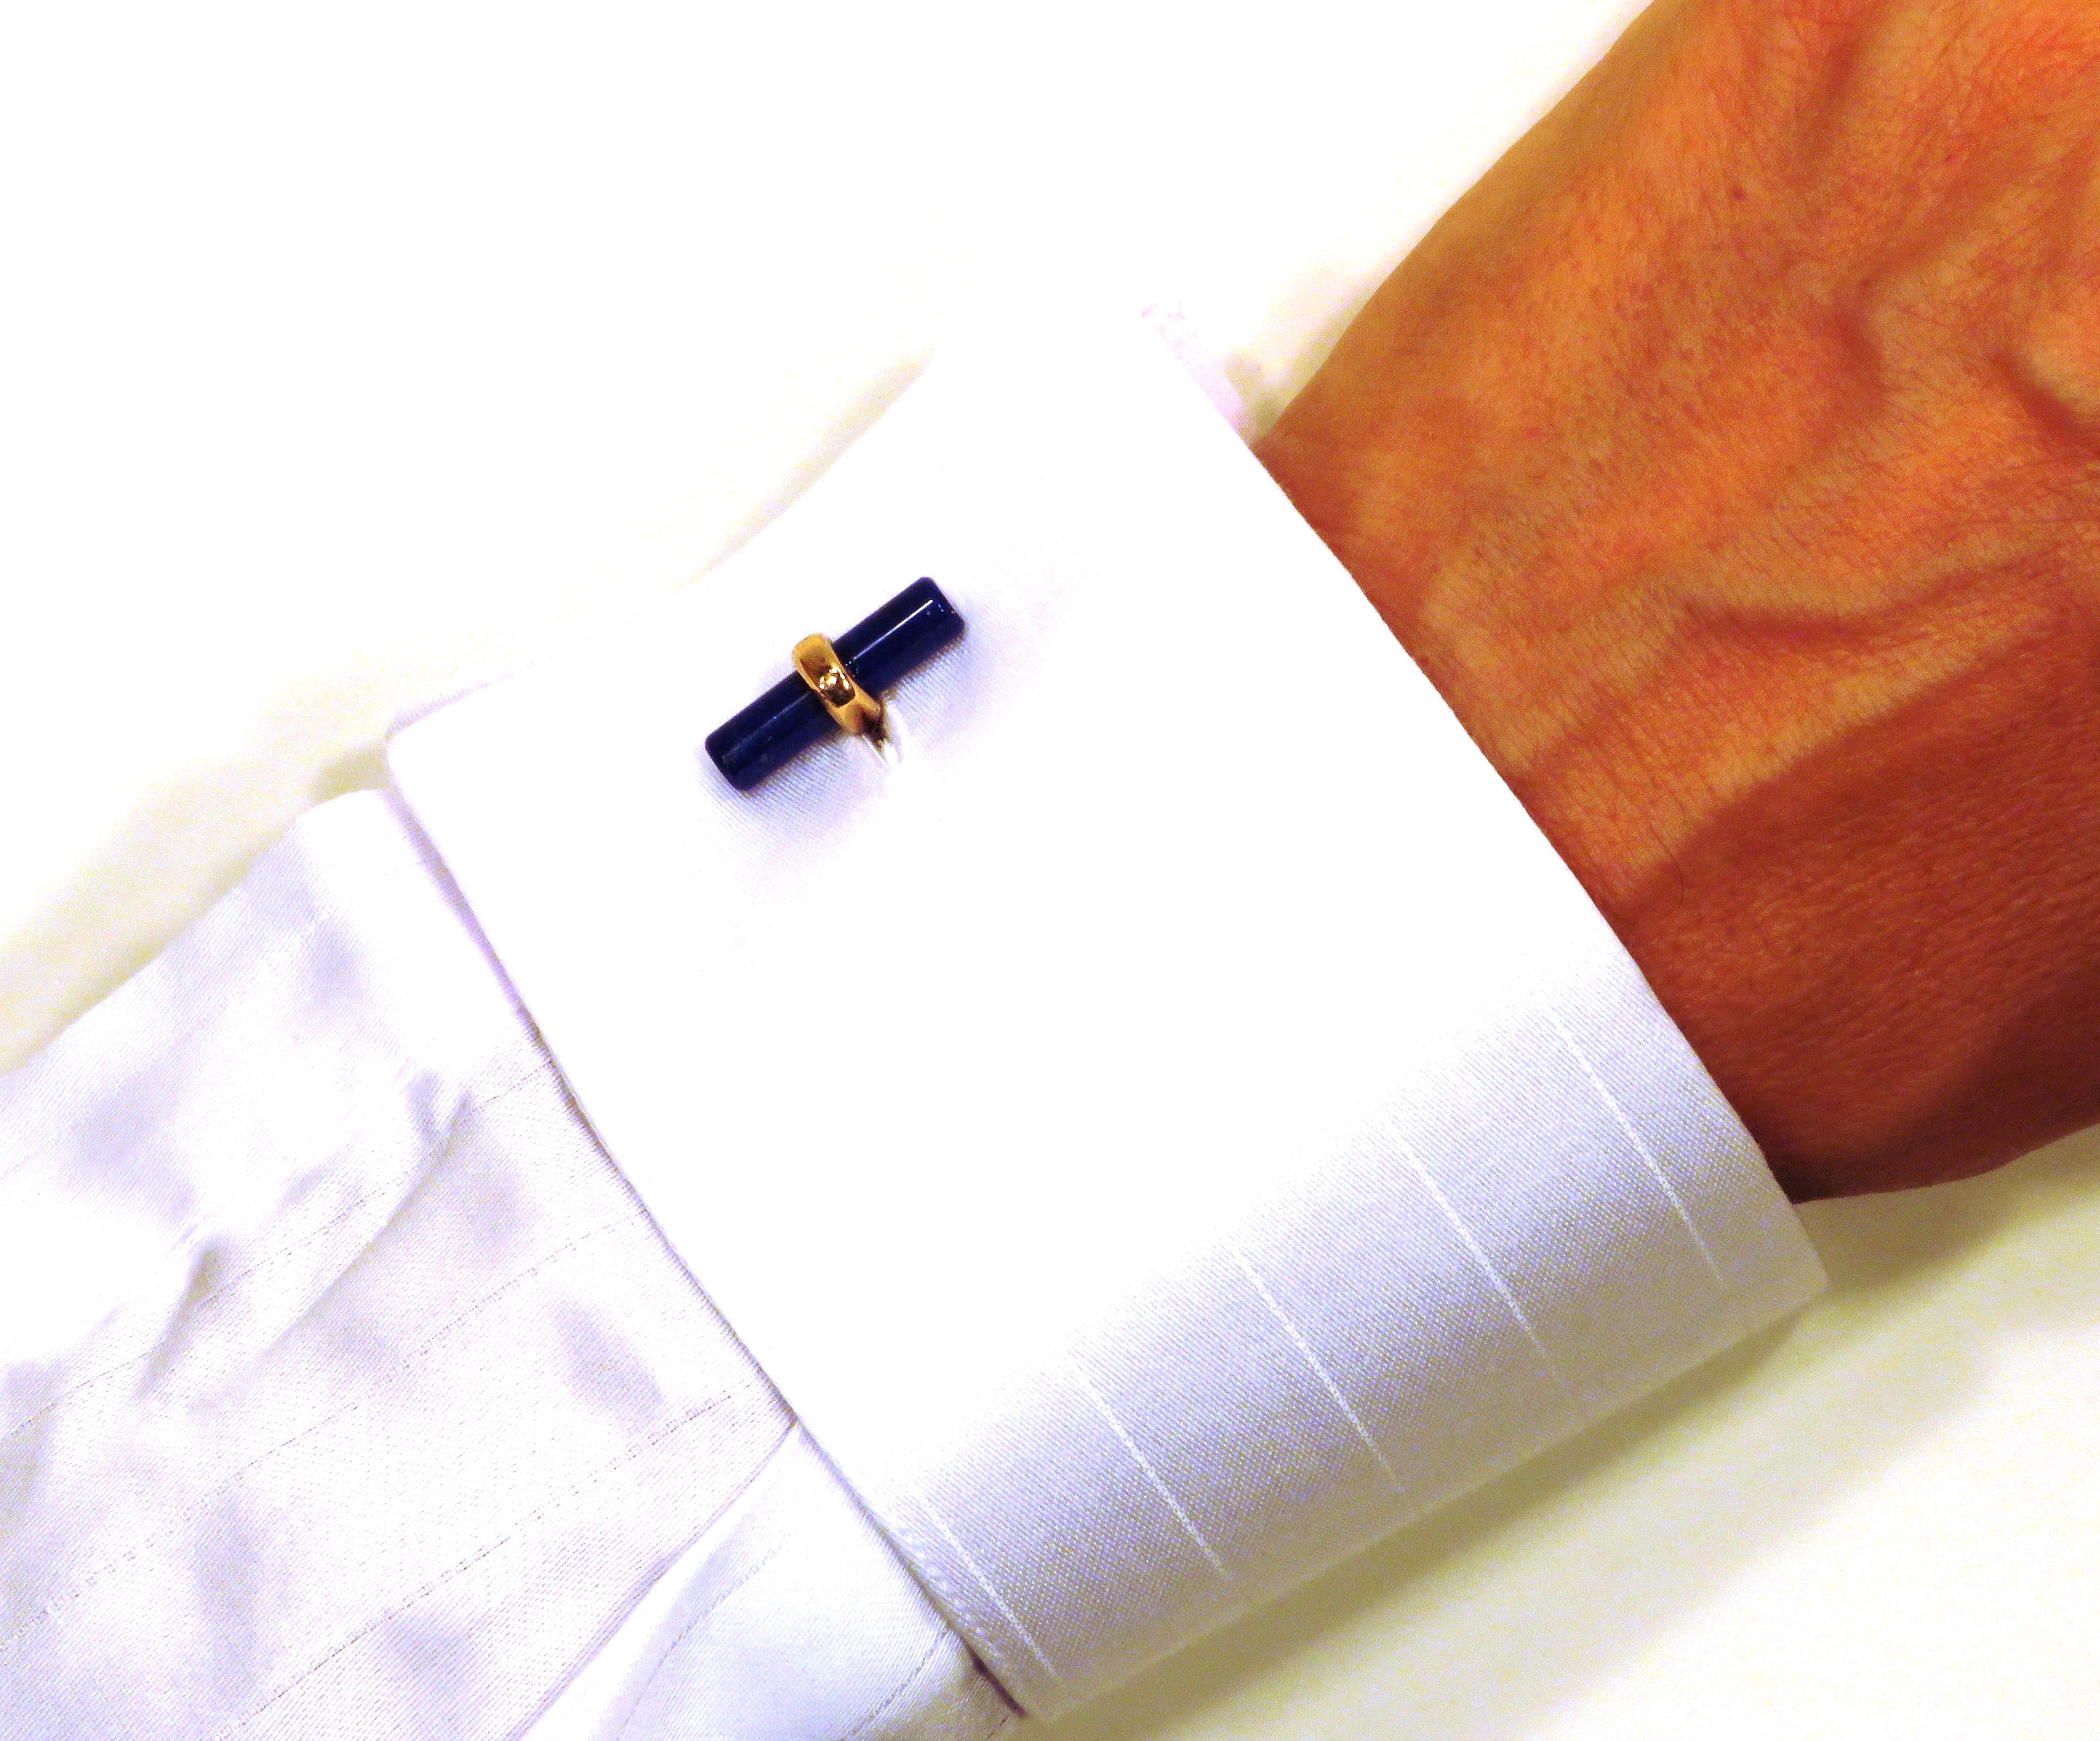 Cufflinks in 9k rose gold with two lapis lazuli bars.
Stones size: length 20 mm - diameter 5 mm (length 0,787402 - diameter 0,19685 inches).
They are stamped with the Italian Gold Mark 375 - 716MI
These cufflinks are also available in my 1stdibs